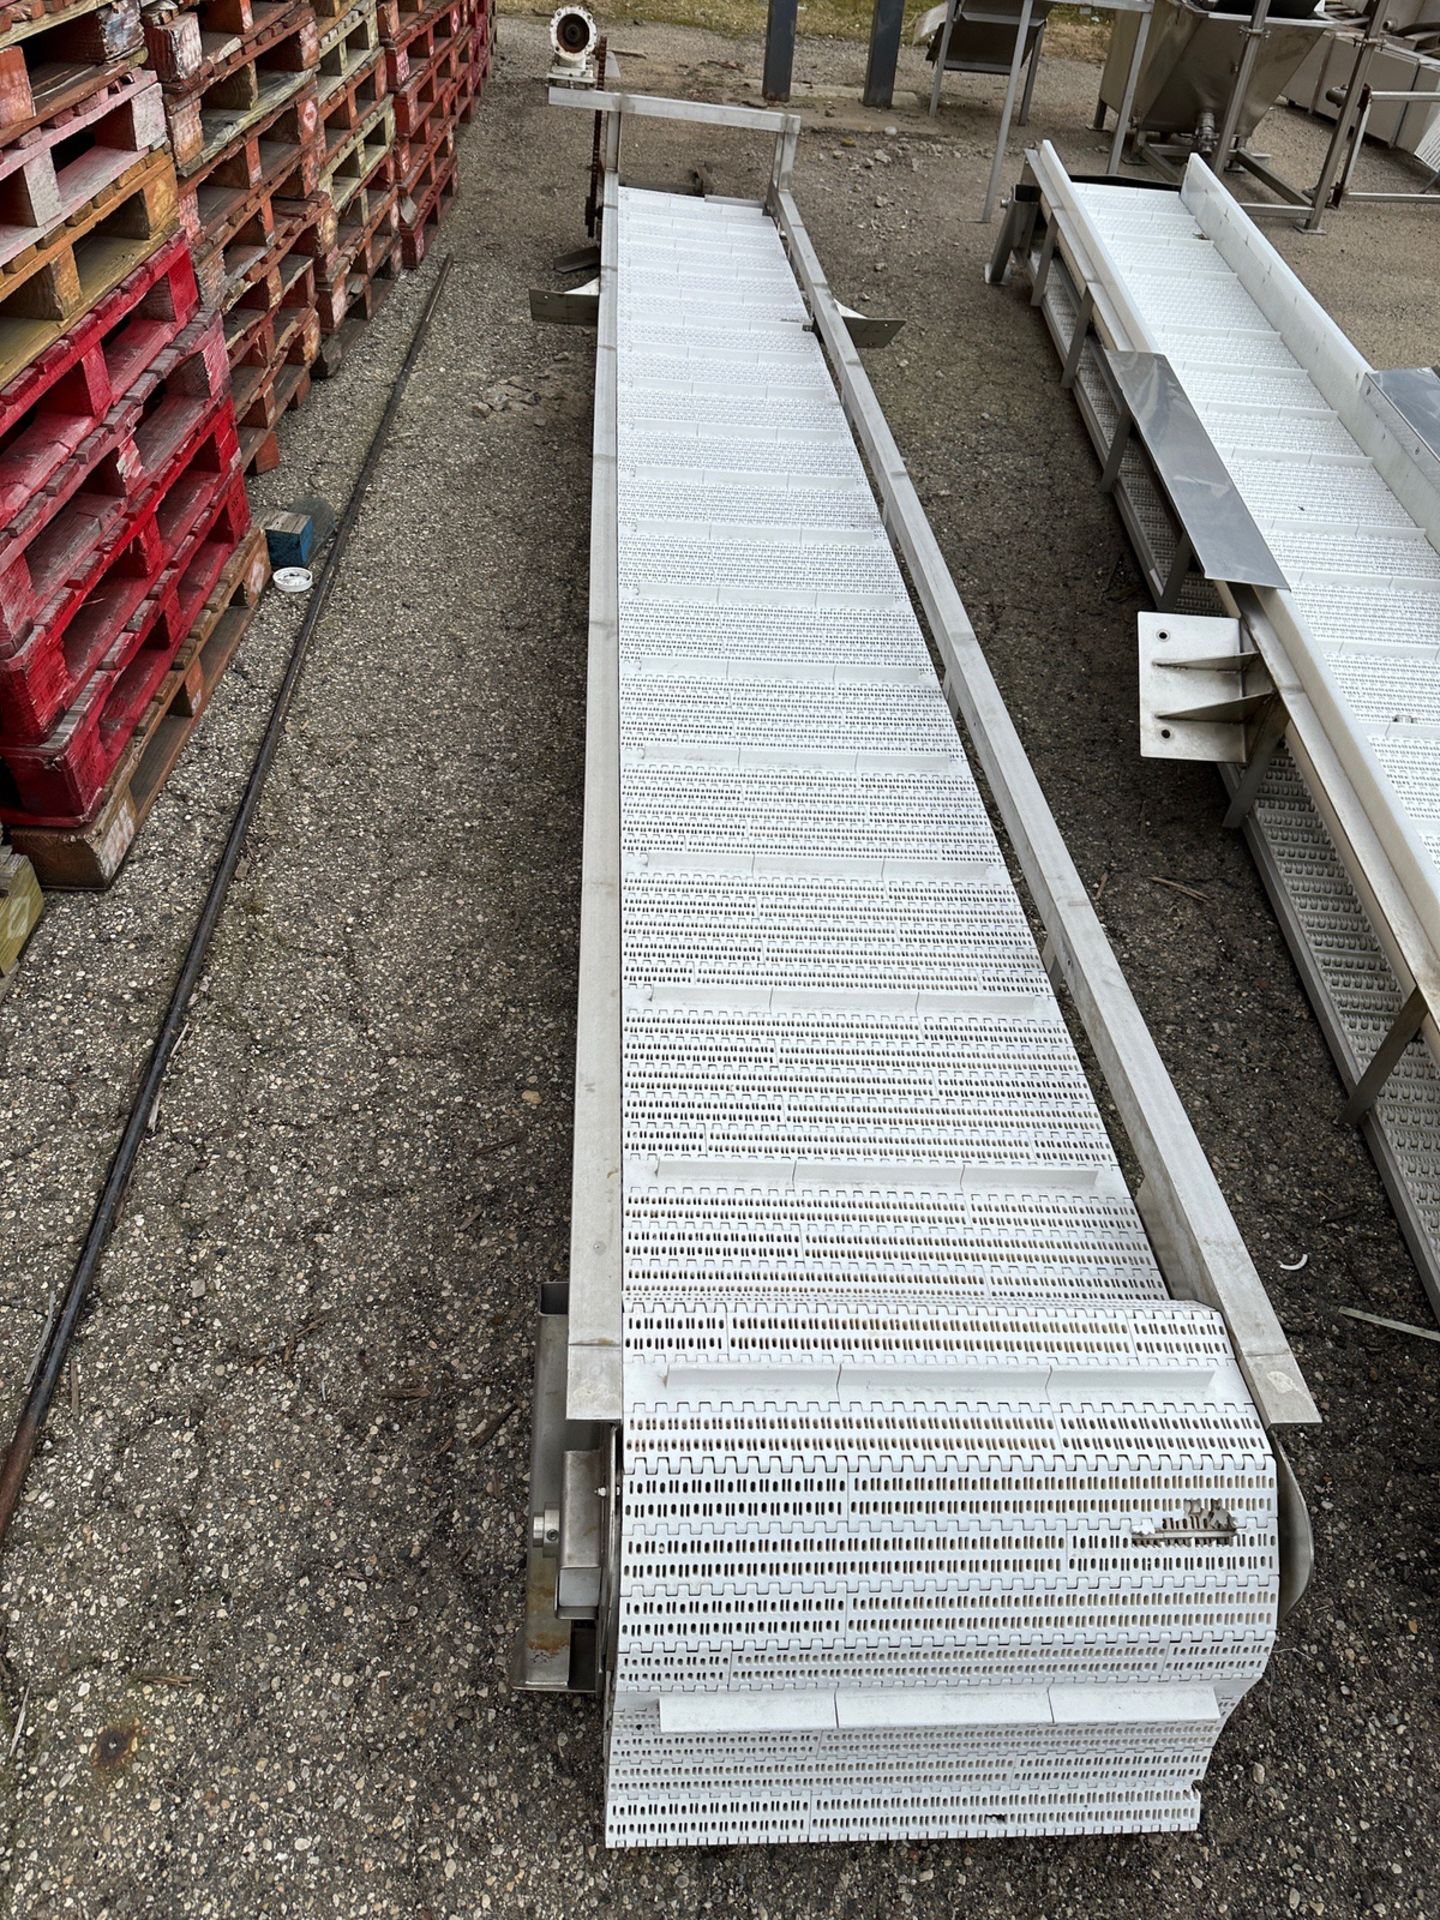 Paddle Conveyor over Stainless Steel Frame (Approx. 23.5" x 18') | Rig Fee $150 - Image 2 of 2